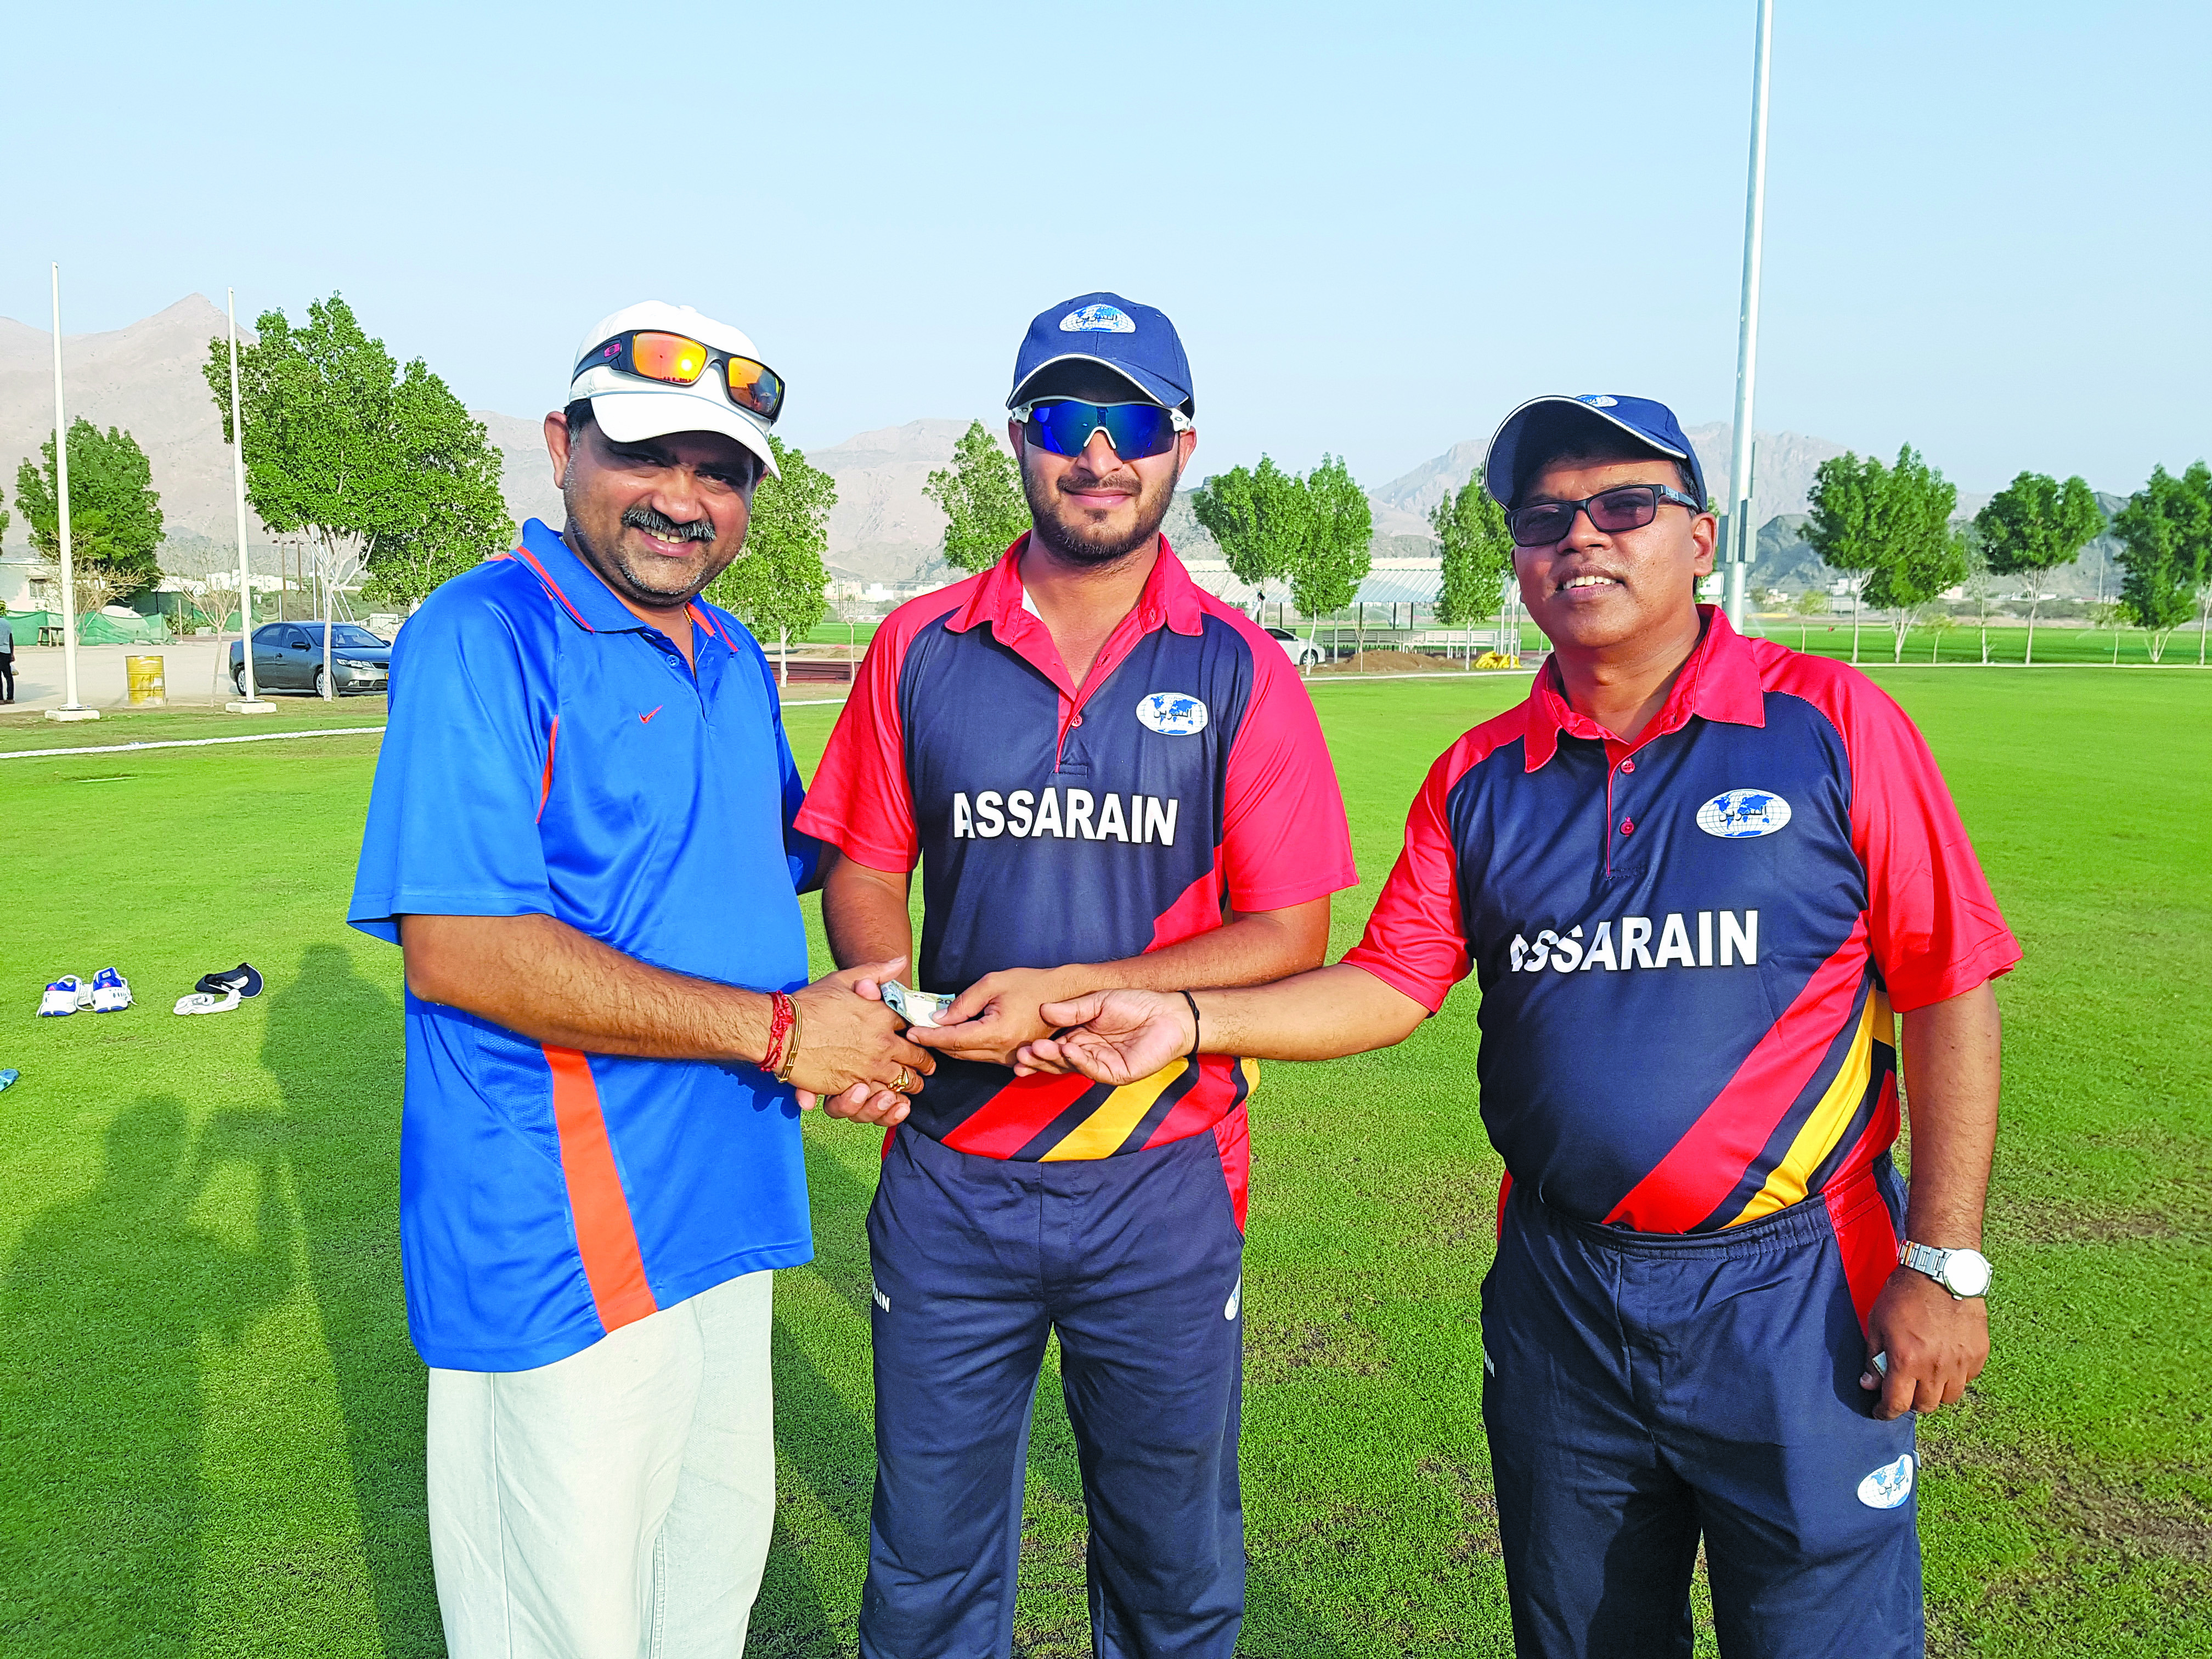 Oman Cricket: Assarain defeat Passage to India for second successive victory